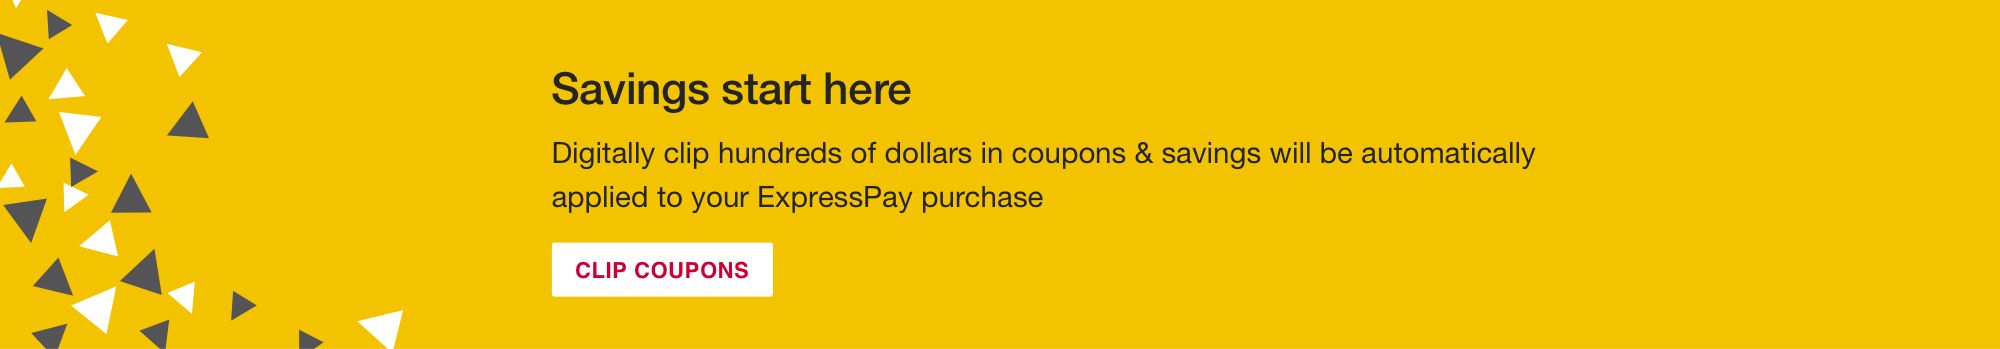 Savings start here. Digitally clip hundreds of dollars in coupons and savings will be automatically applied to your ExpressPay purchase. Click to start clipping